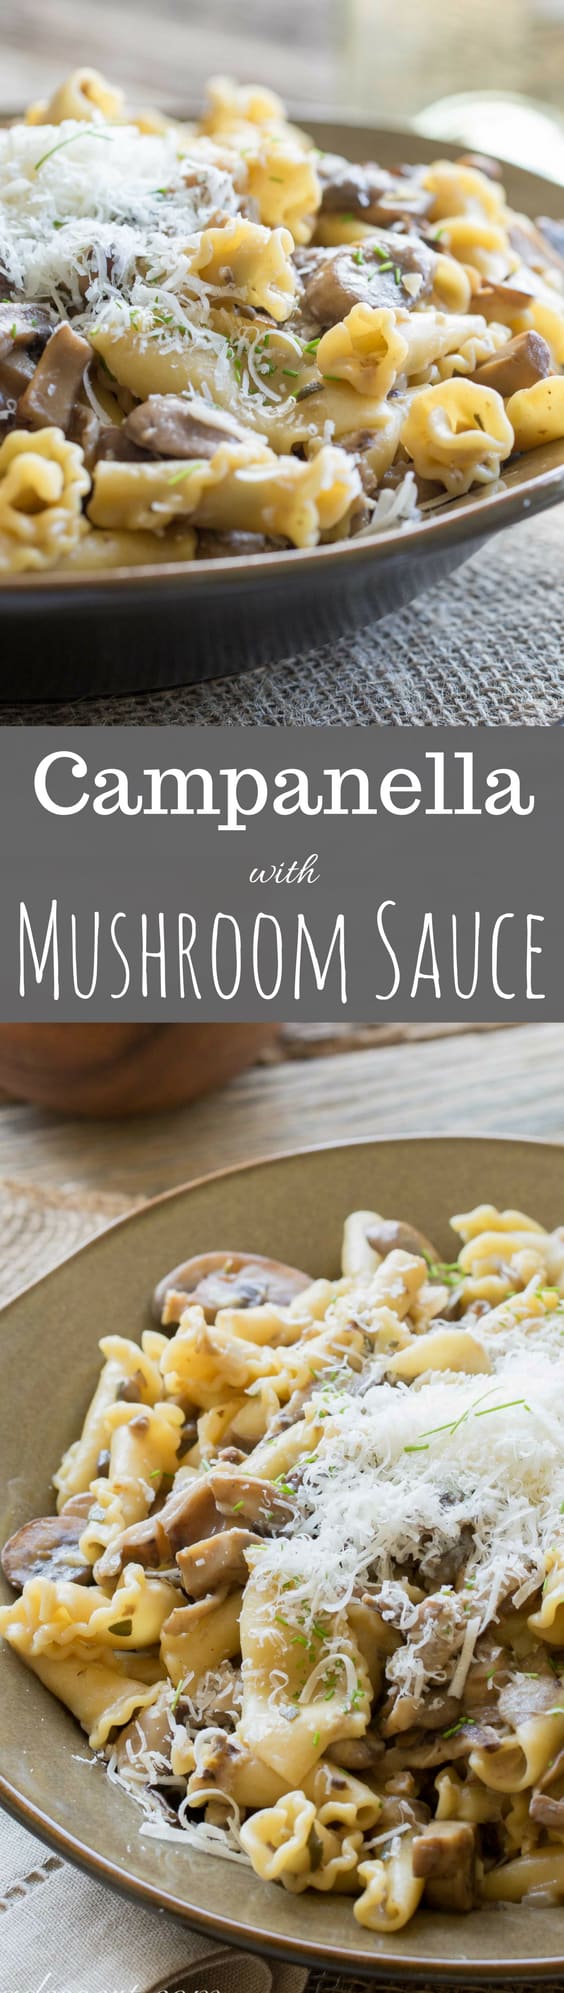 Campanella Pasta with a rich Mushroom Wine Sauce and grated Pecorino Romano- perfect for your meatless Monday dinner or as a hearty side dish.  www.savingdessert.com